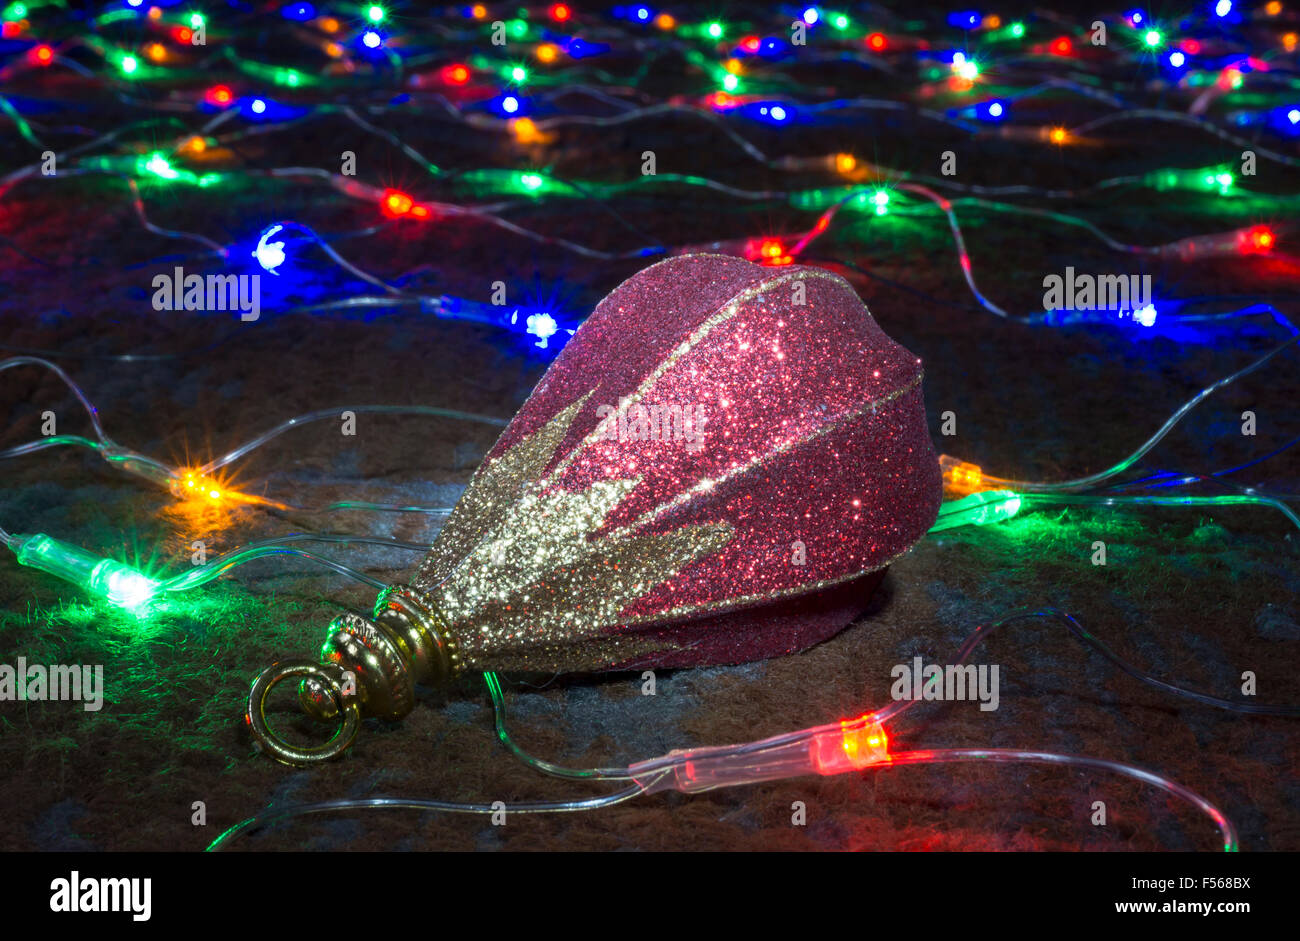 Toy rests upon festoon of the colour lights on dark background Stock Photo